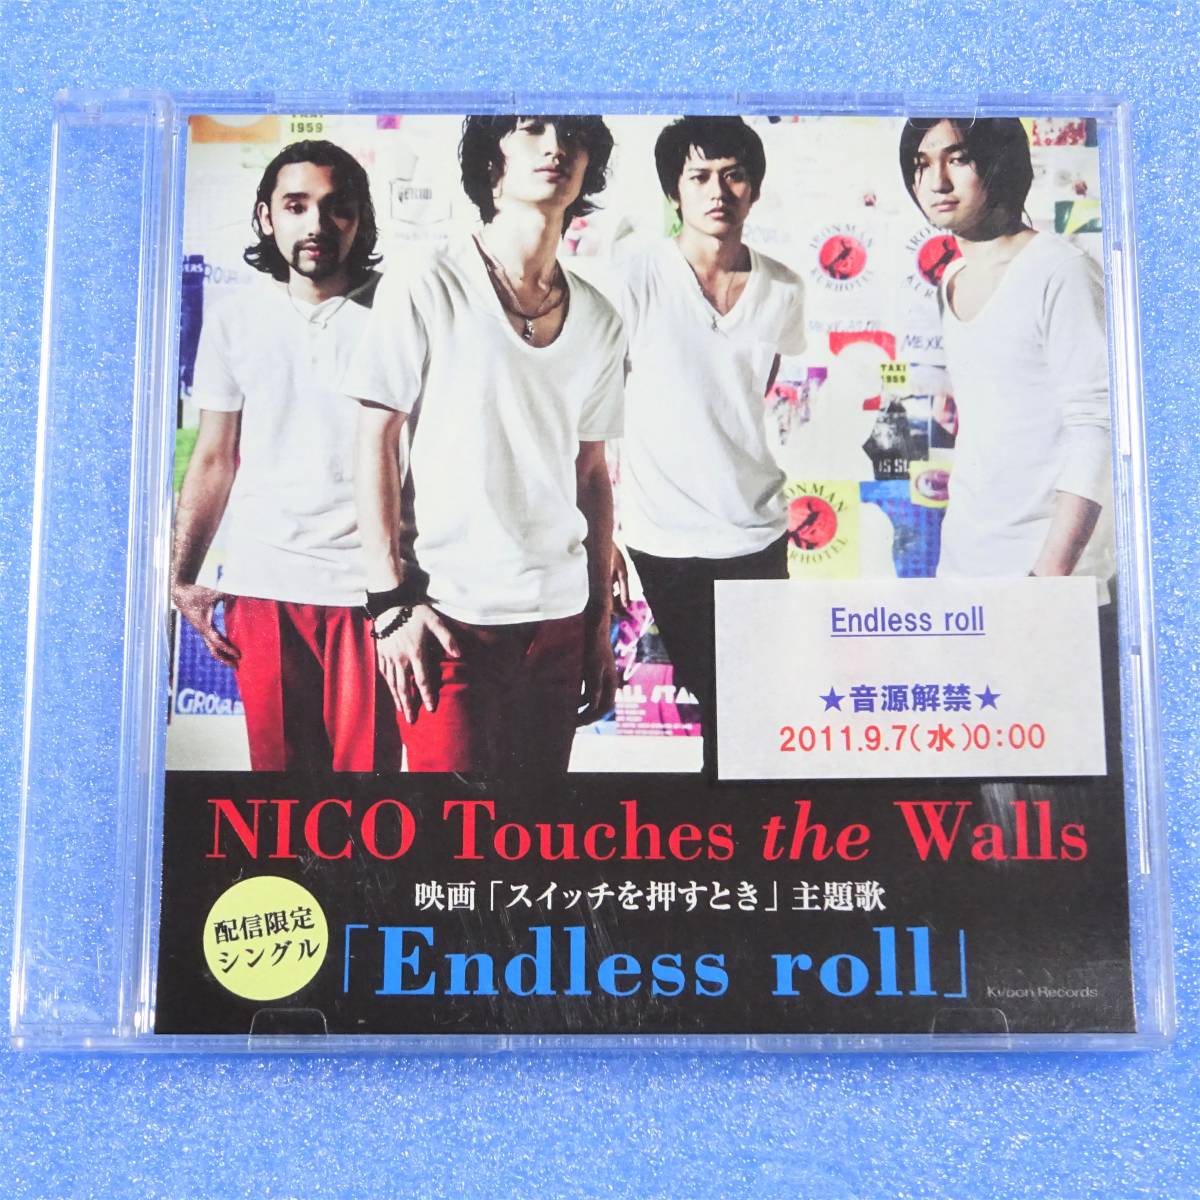 CD NICO TOUCHES THE WALLS ENDLESS ROLL 非売品 見本品 2011年 映画 スイッチを押すとき 主題歌